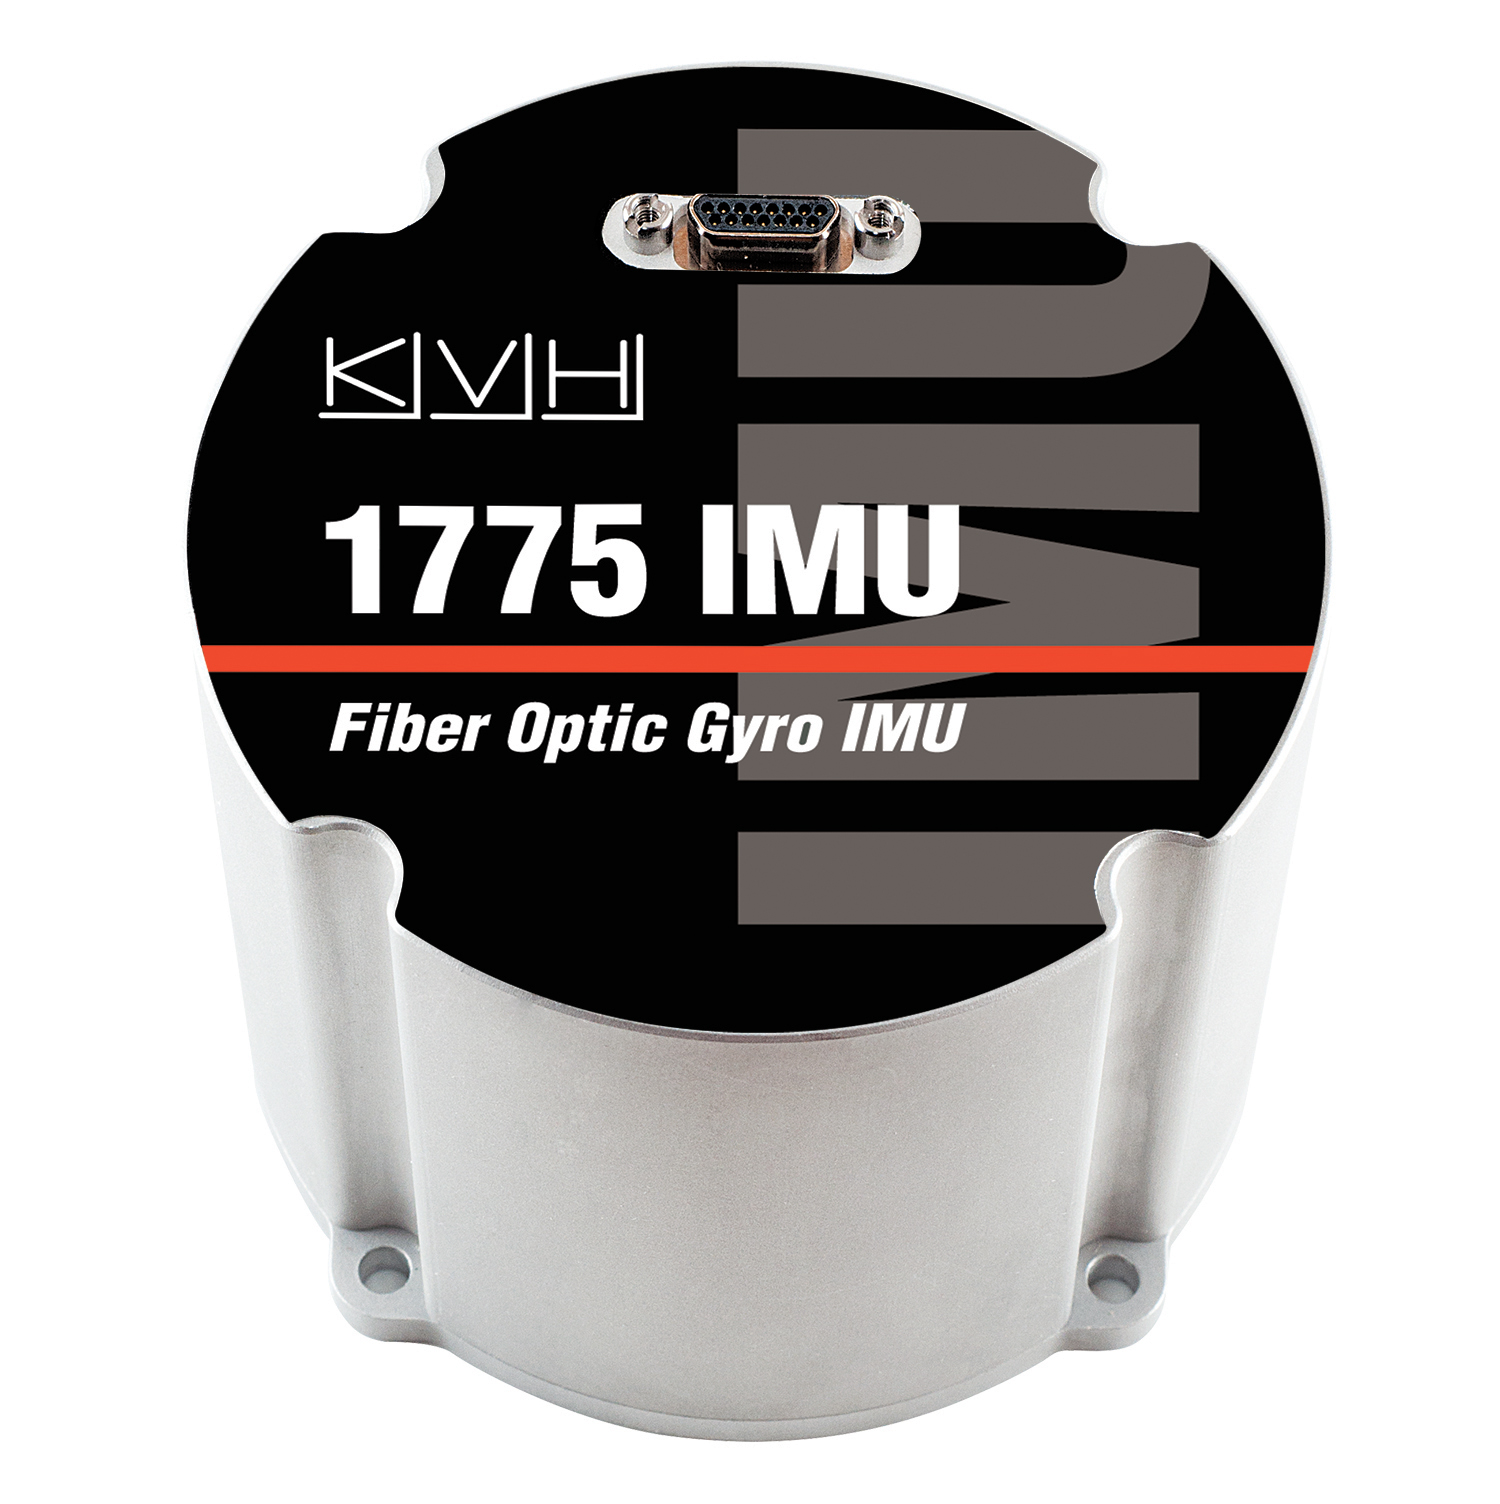 Inertial Measurement Unit With 25g Accelerometers Designed for Highly Dynamic Applications